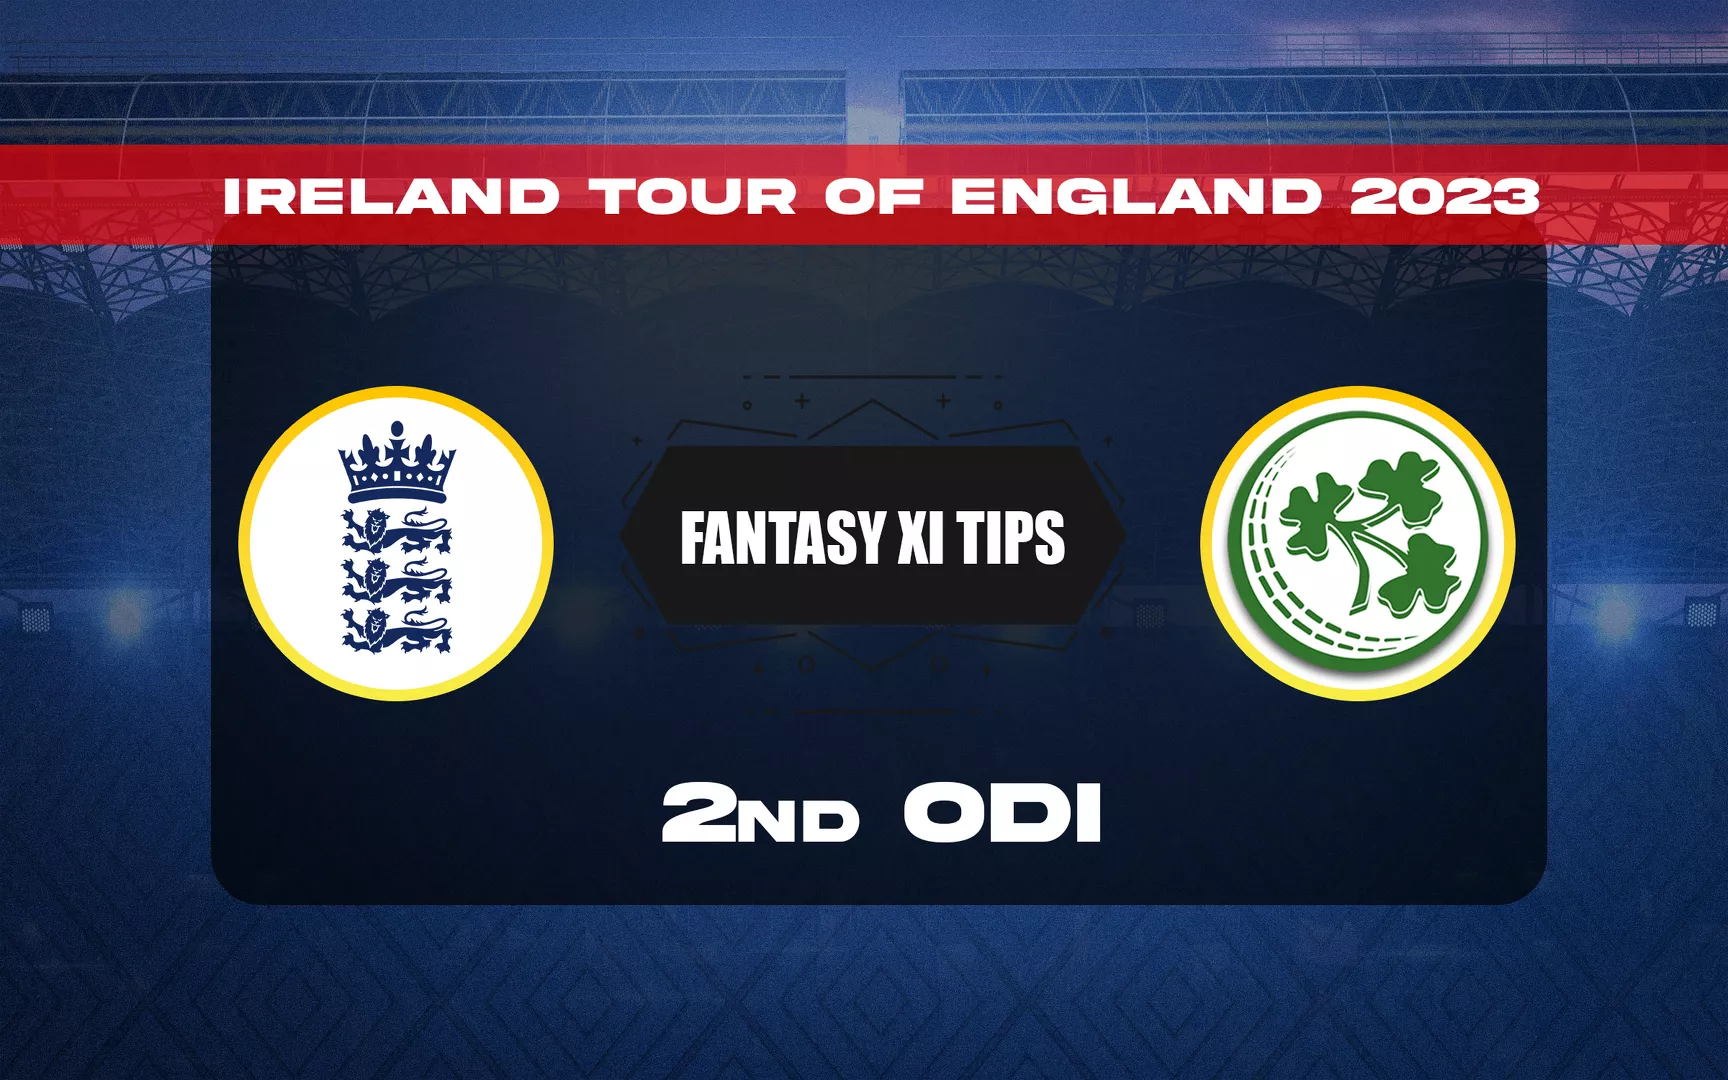 ENG vs IRE Dream11 Prediction, Dream11 Playing XI, Today 2nd ODI, Ireland tour of England 2023